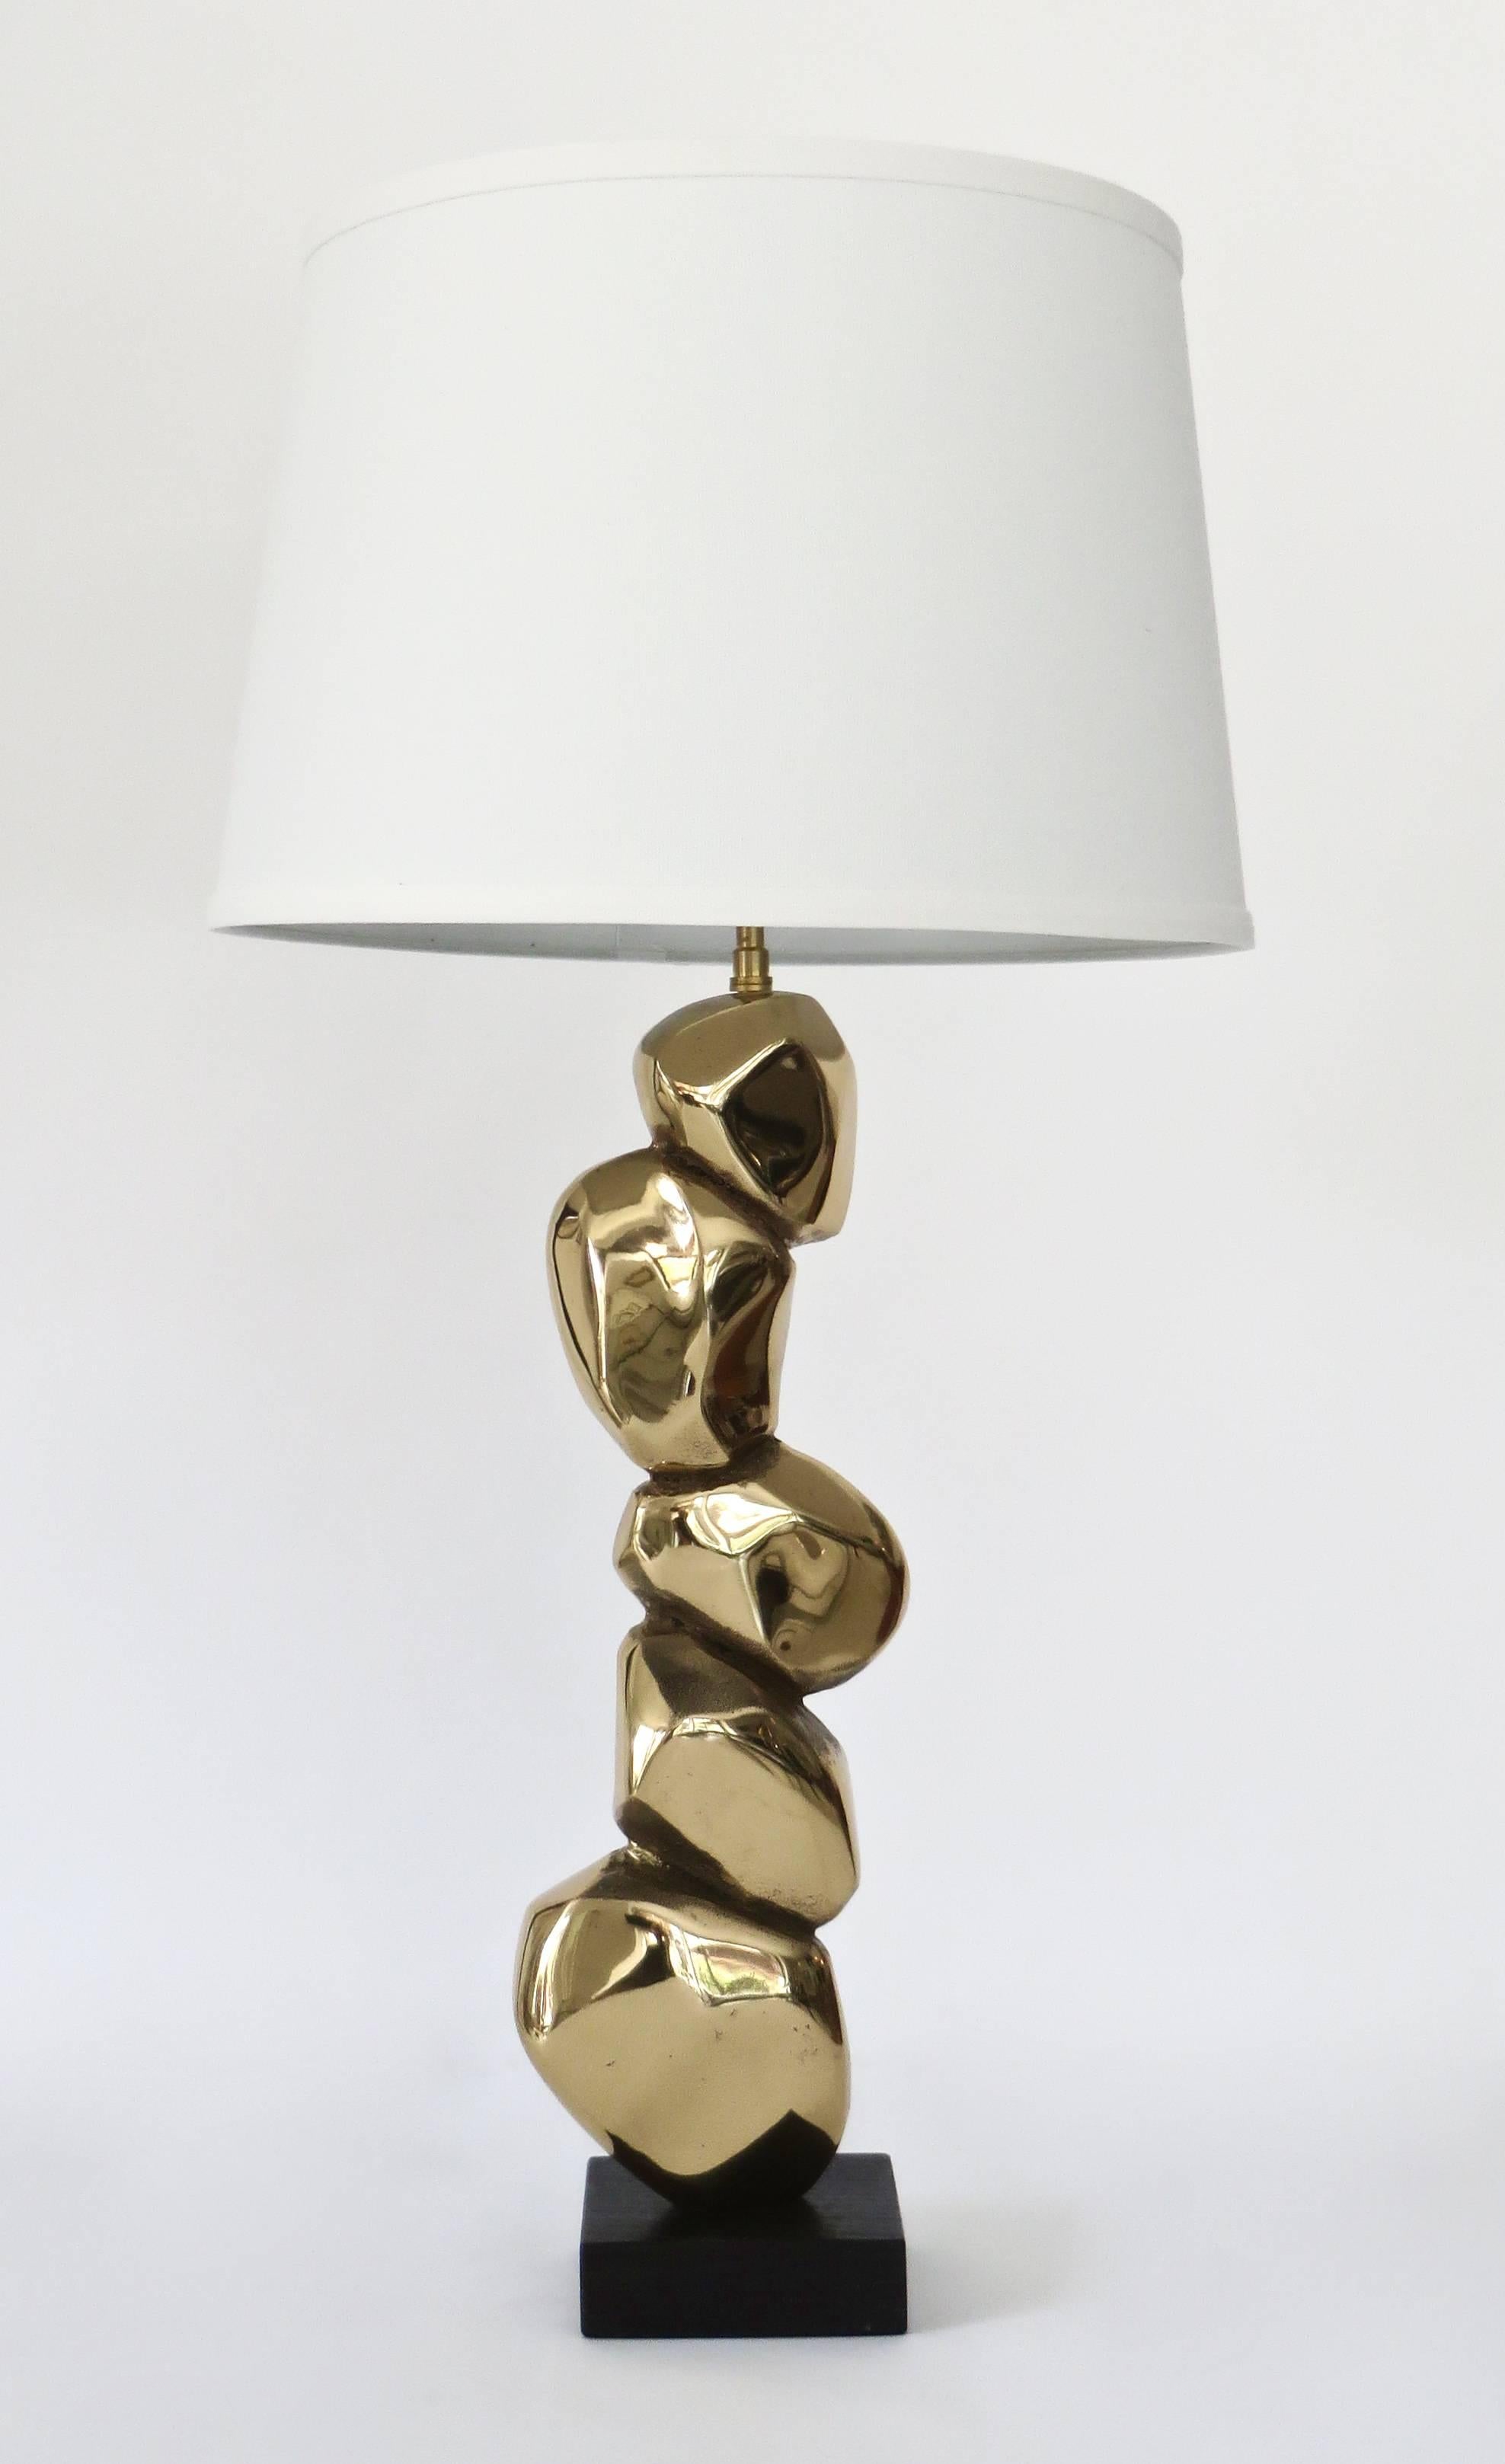 Pair of French sculptural bronze stone motif table lamps by Michel Jaubert. Signed on side M. Jaubert. Composed of five abstractly sculpted bronze stones. Hollow back showing casting. Shades are not included. Rewired for USA overall size of lamp